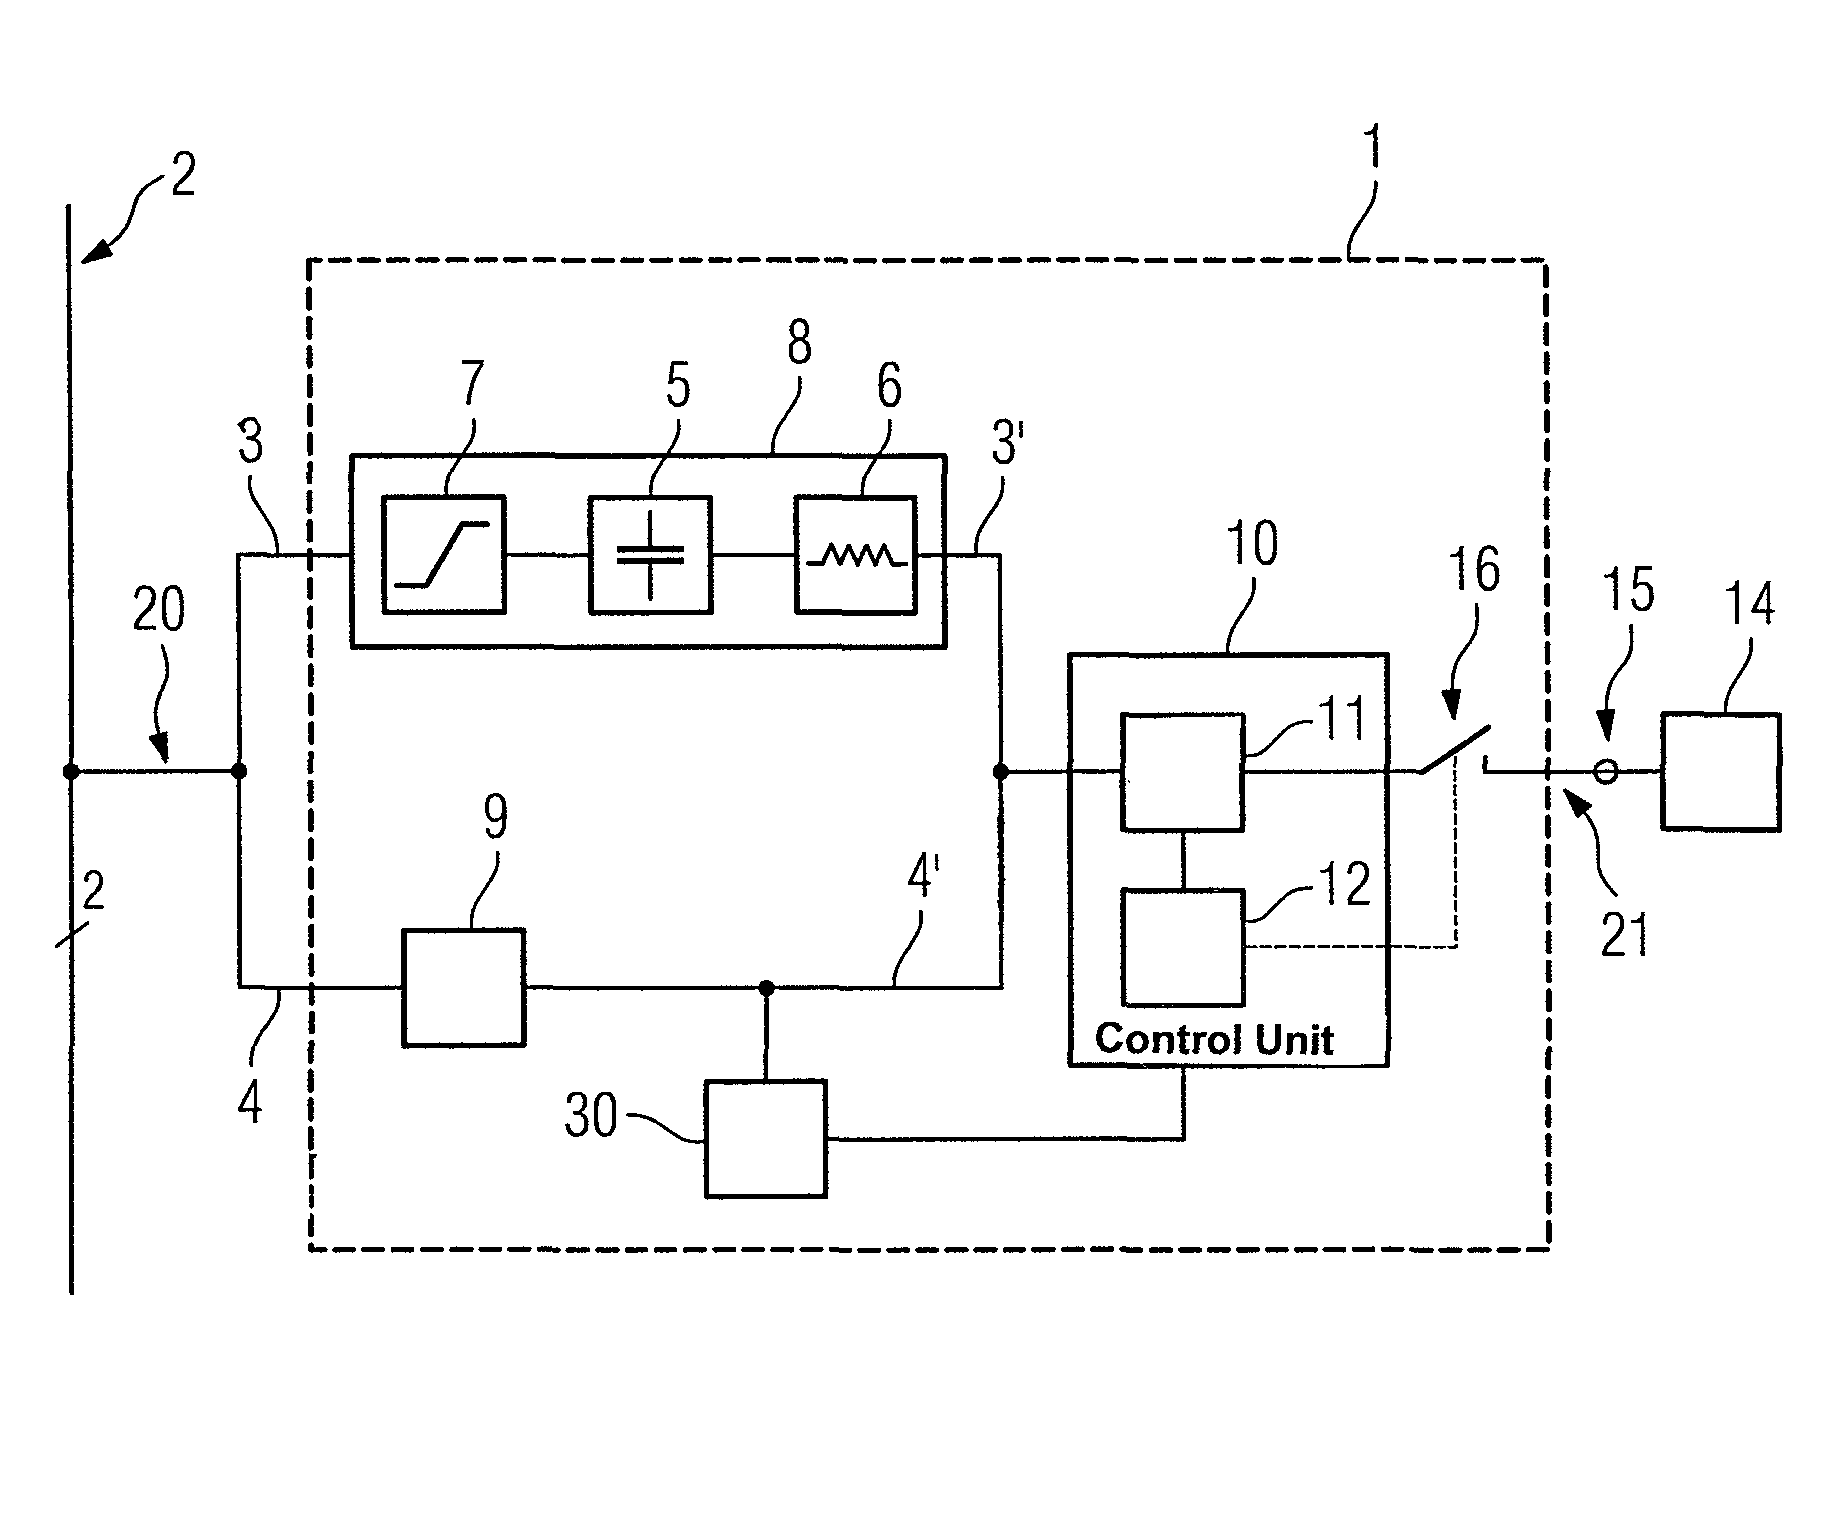 Connecting apparatus for connection of field devices